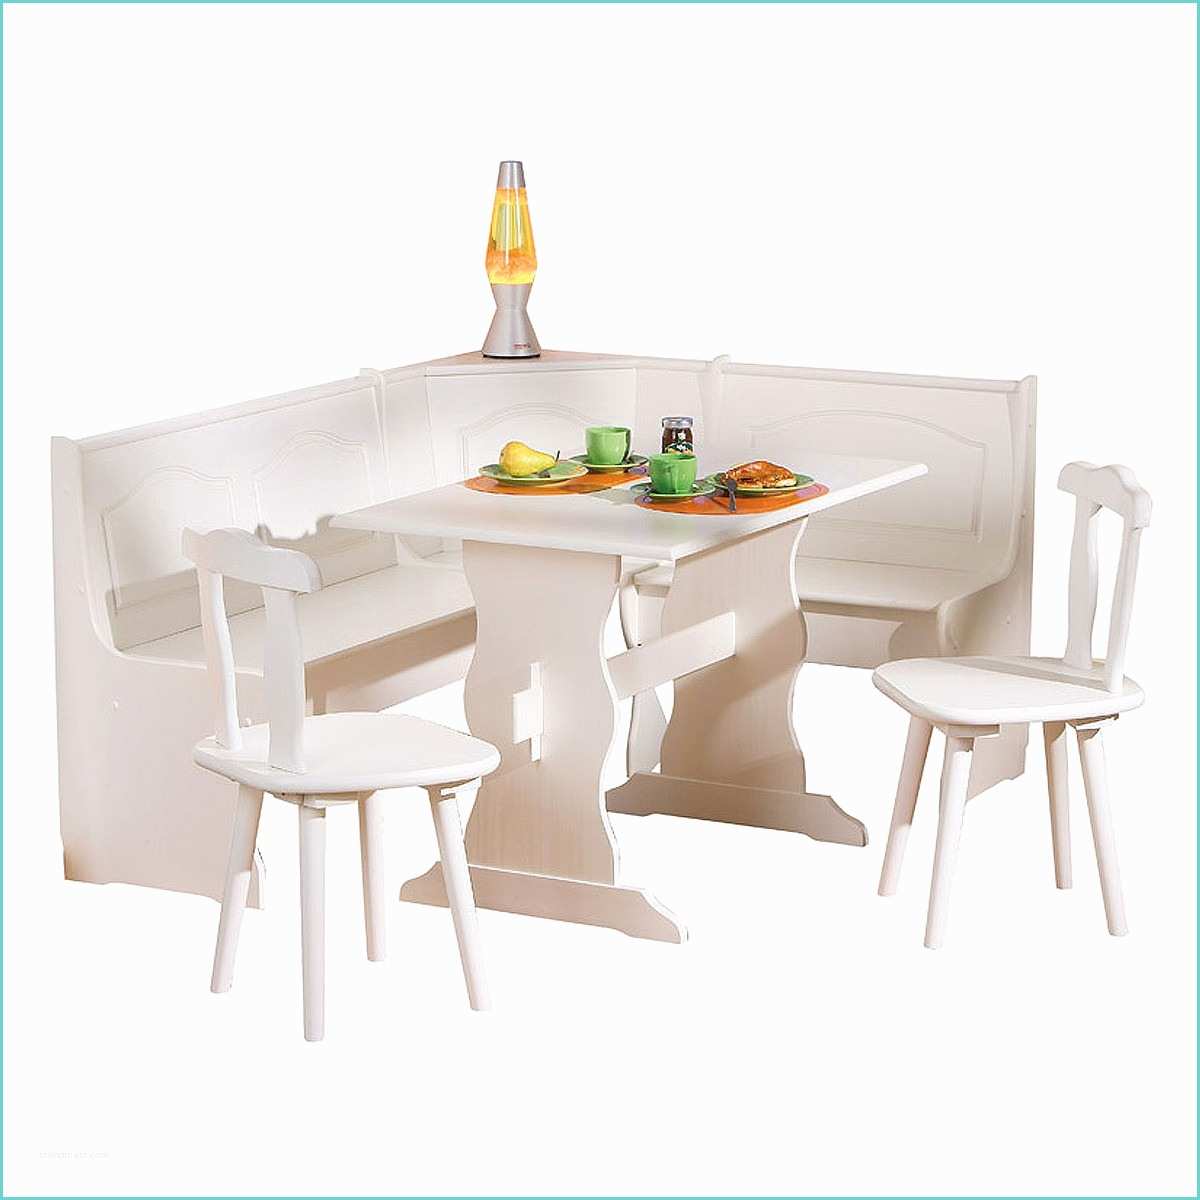 Banquette Angle Coin Repas Cuisine Mobilier Banquette Coin Repas Perfect Banc D Angle Cuisine